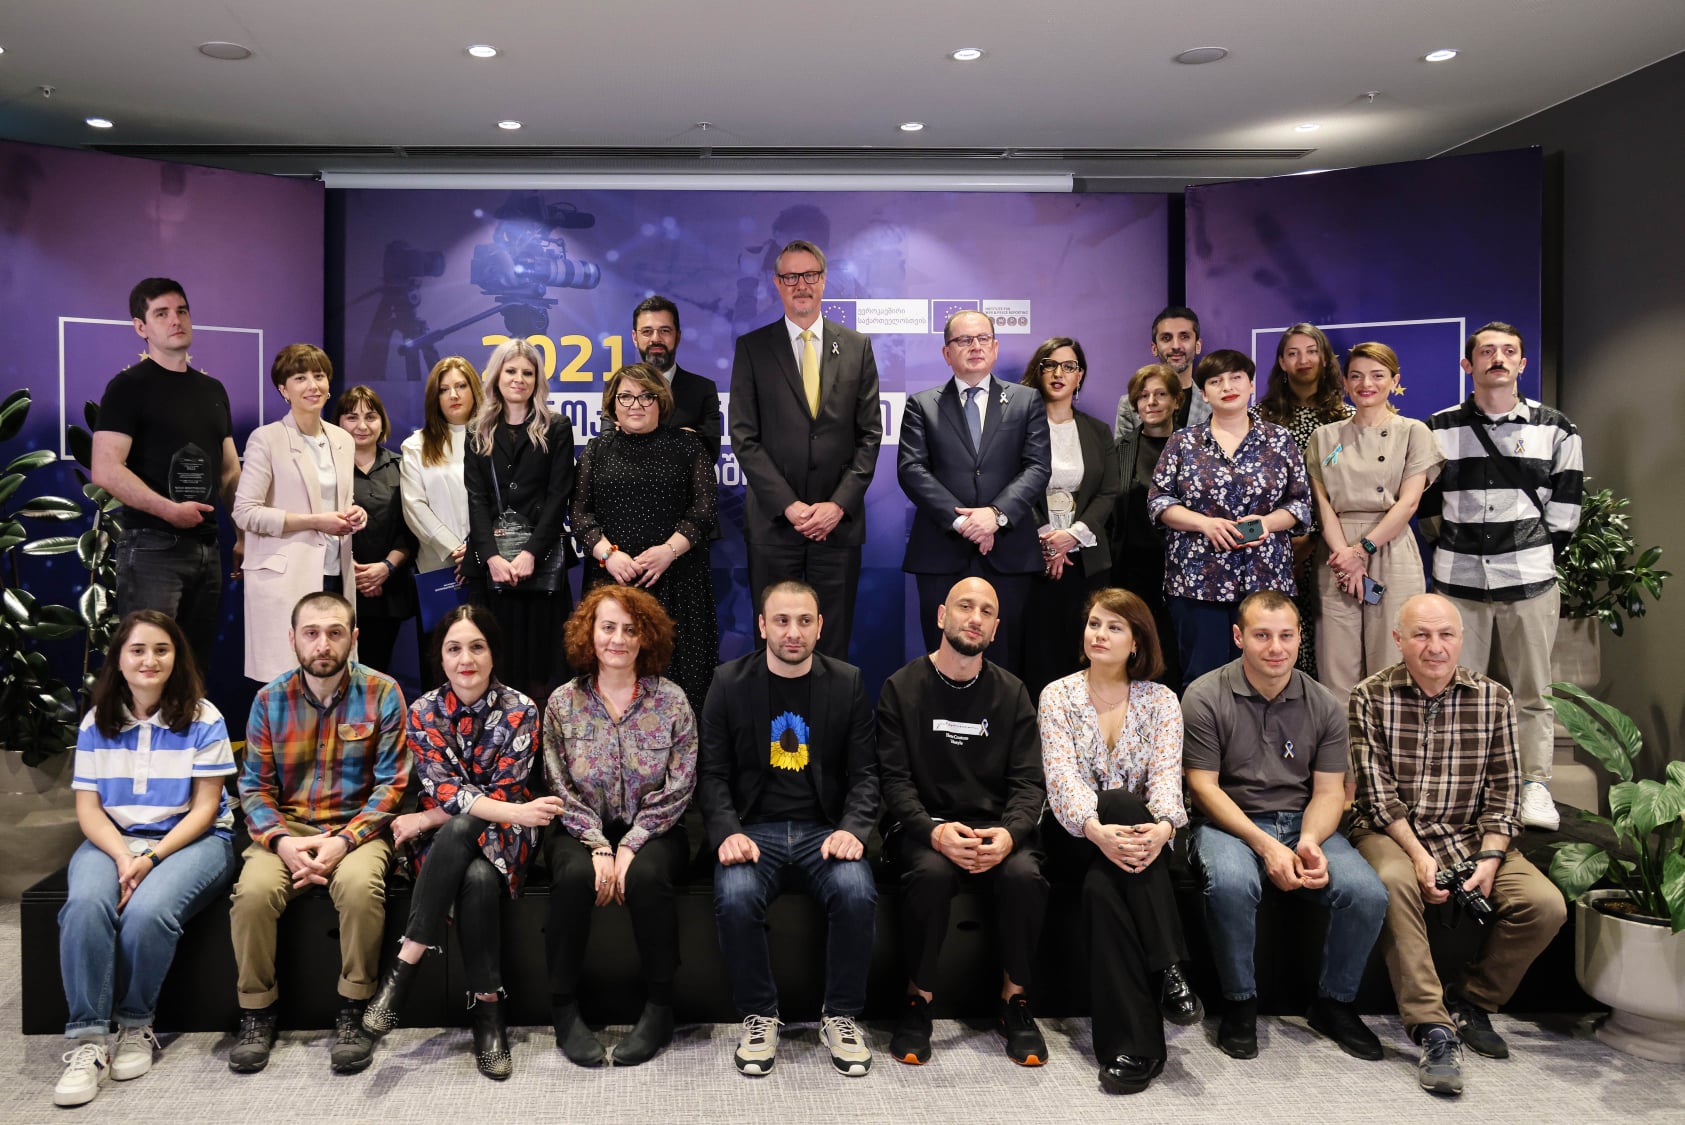 Winners of the EU Prize for Journalism 2021 are announced